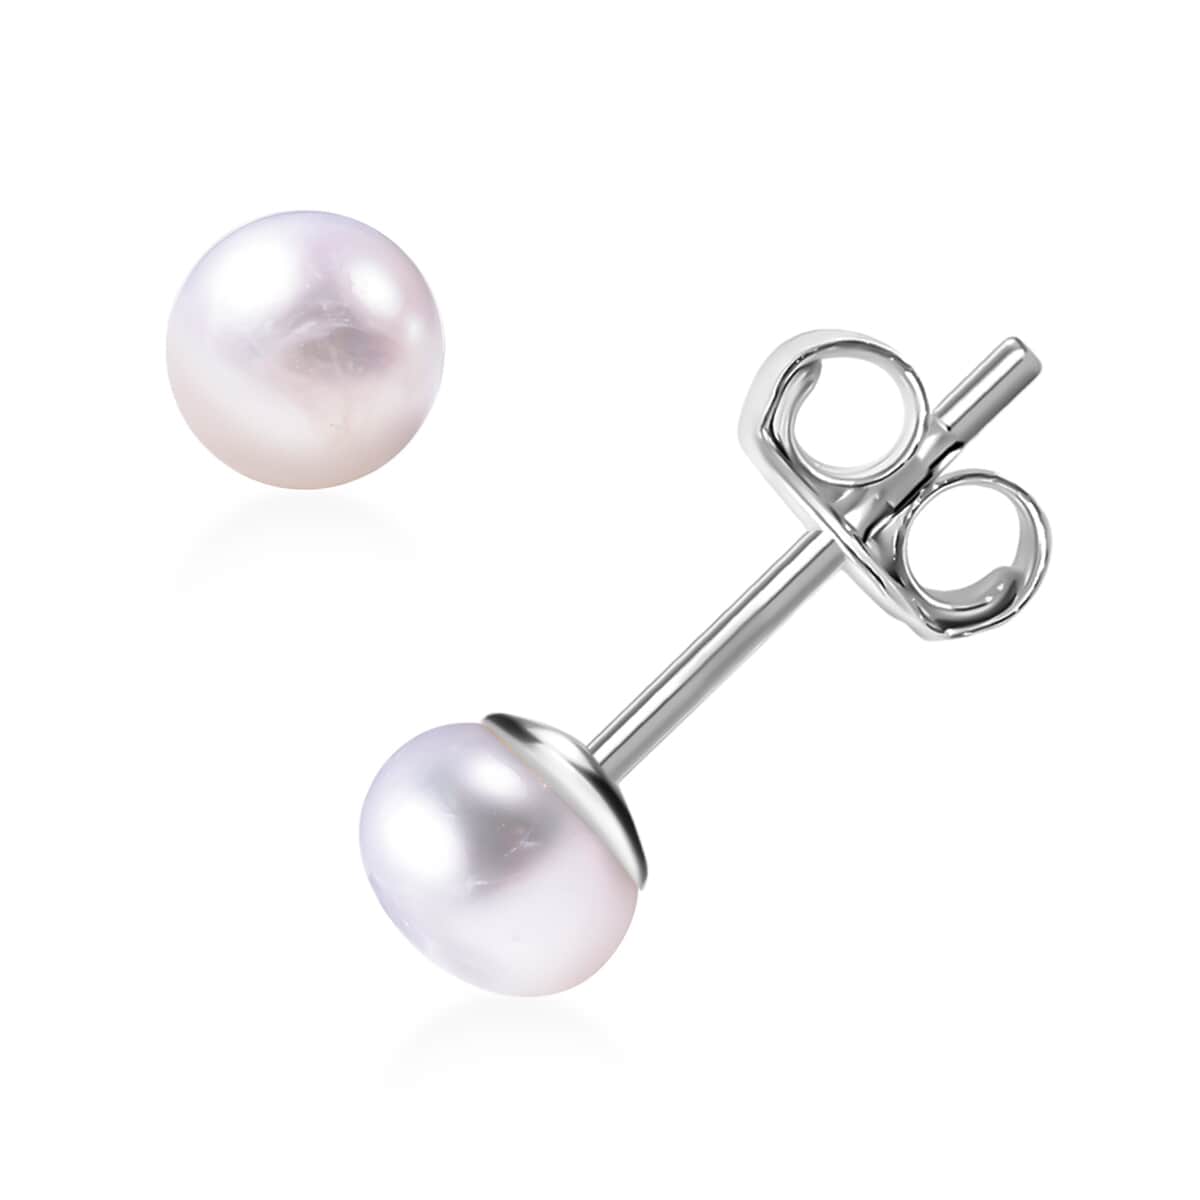 Set of 5 Freshwater Cultured White Pearl Stud Earrings in Stainless Steel, Solitaire Pearl Earrings, Pearl Jewelry For Women image number 5